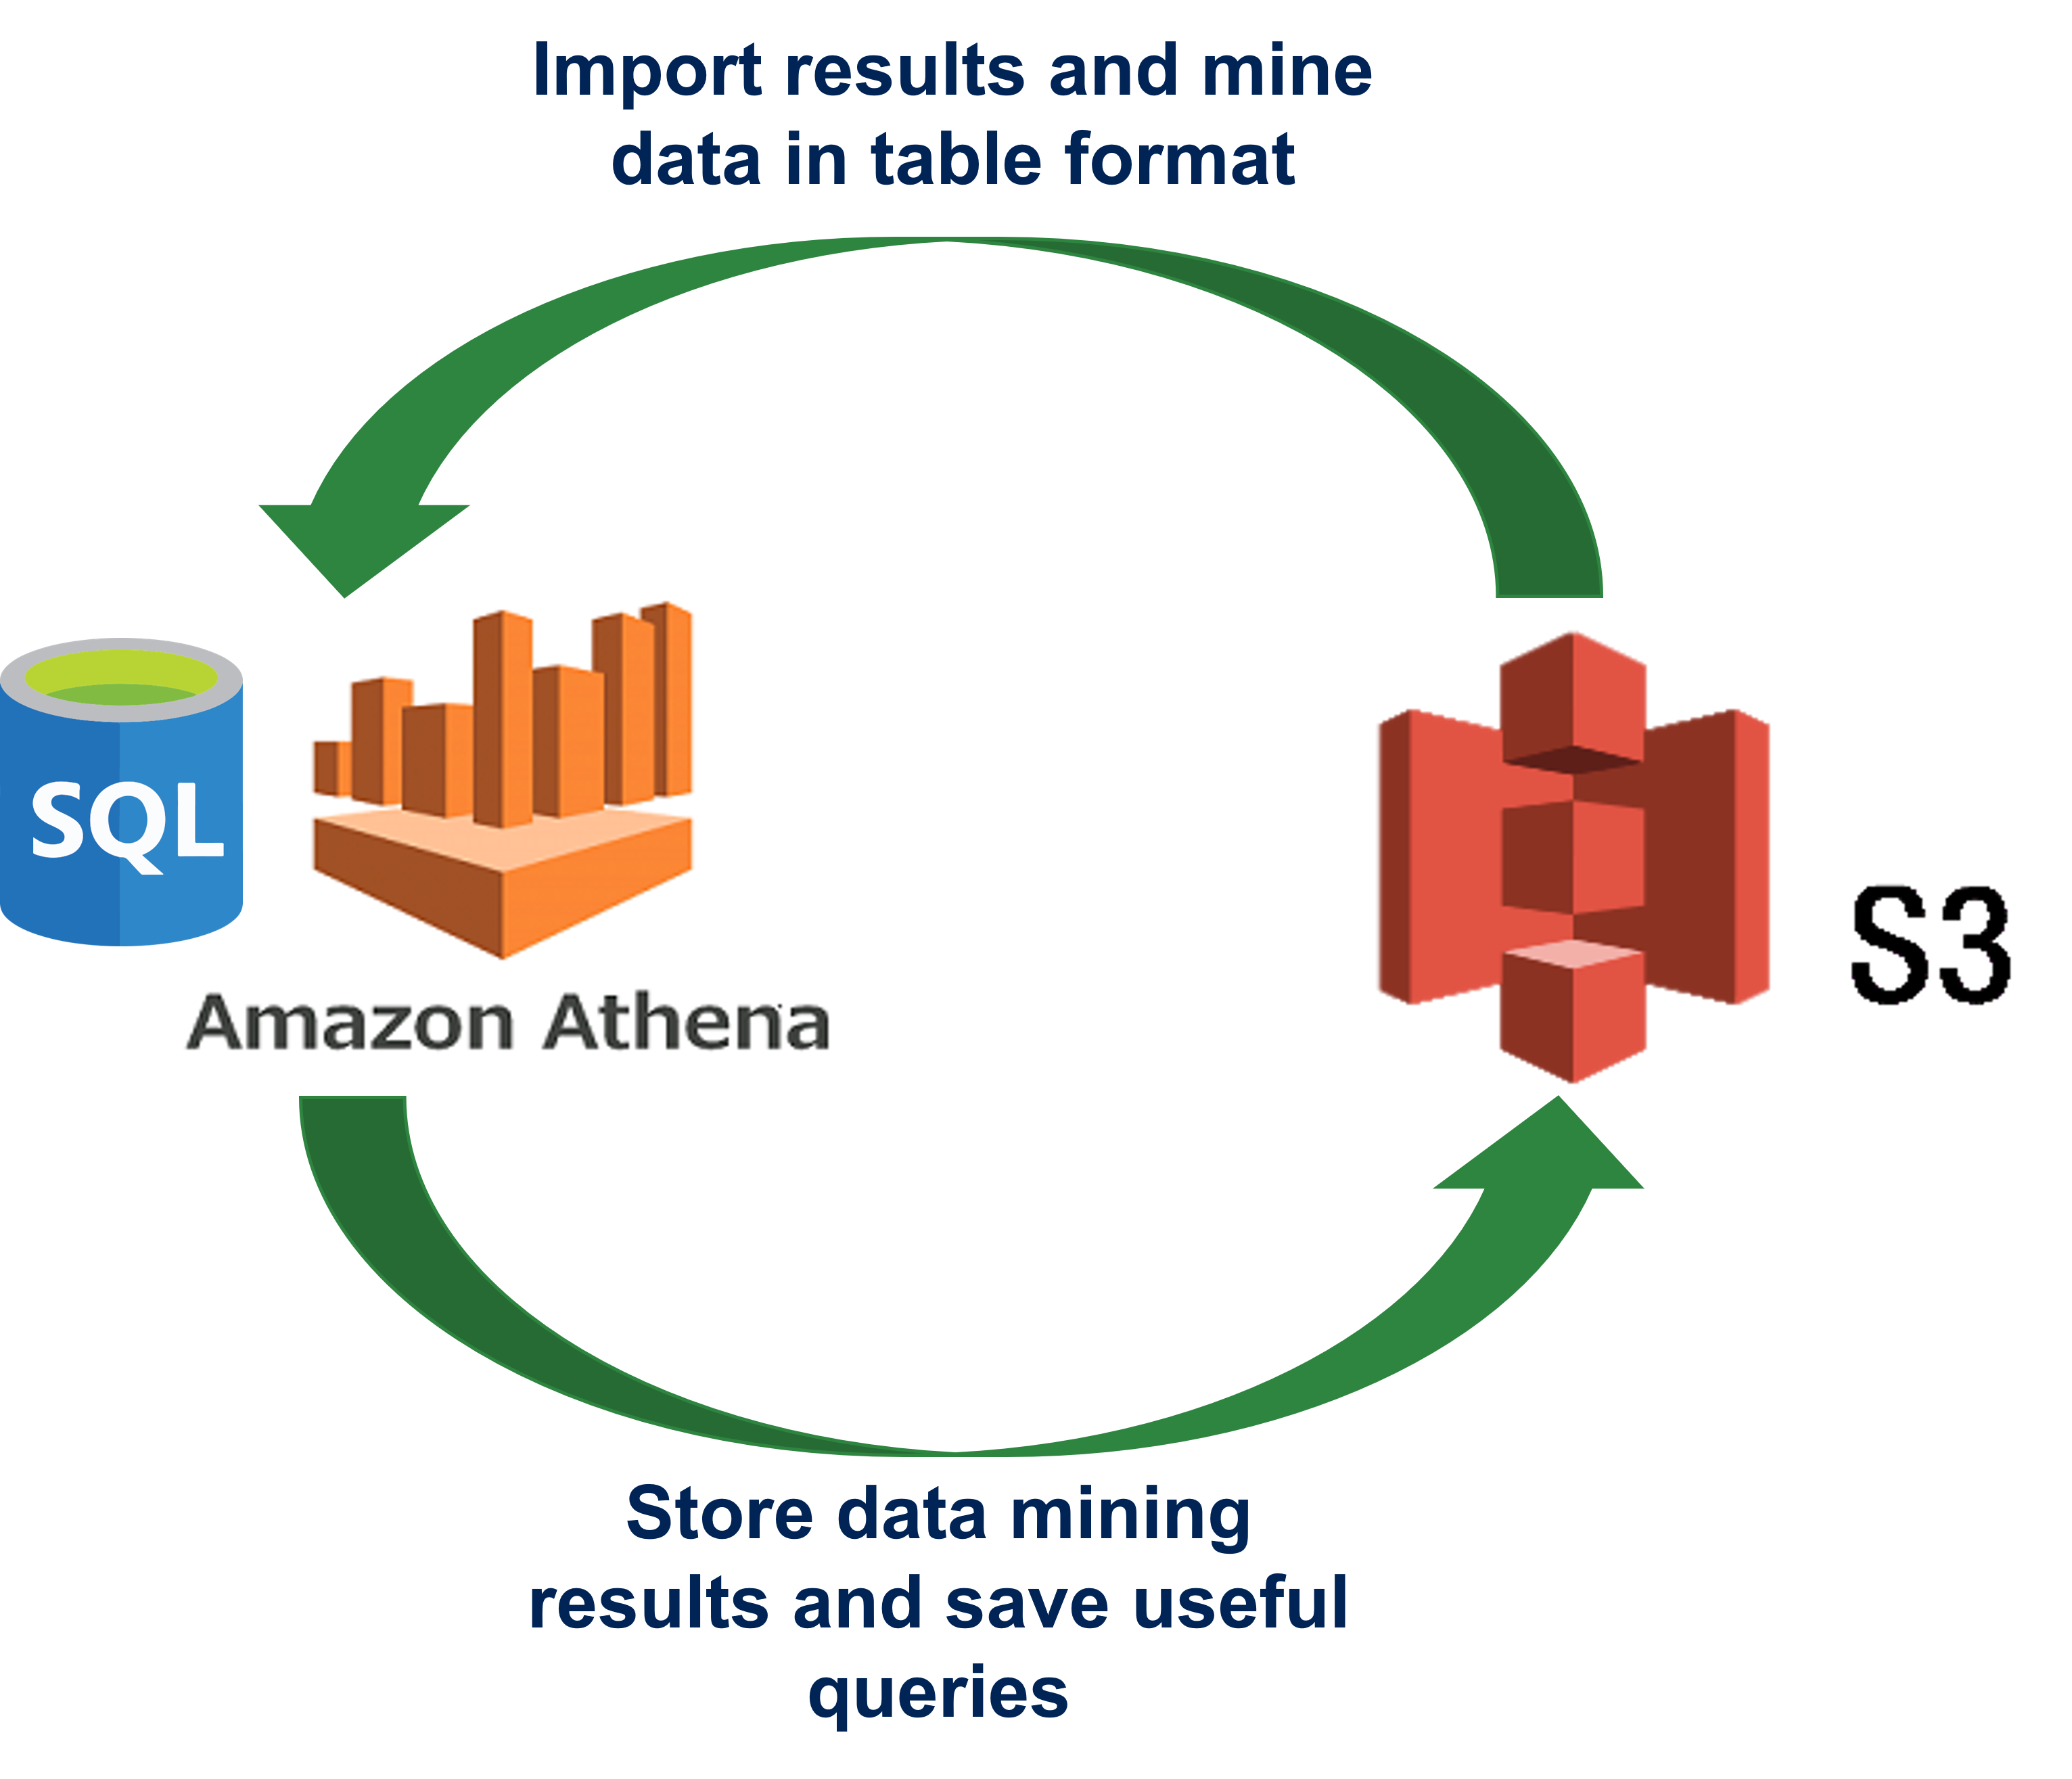 workflow loop for AWS Athena. First we pull data from an S3 bucket and analyze it with AWS Athena, then save our refined results back to the S3 bucket for use later.